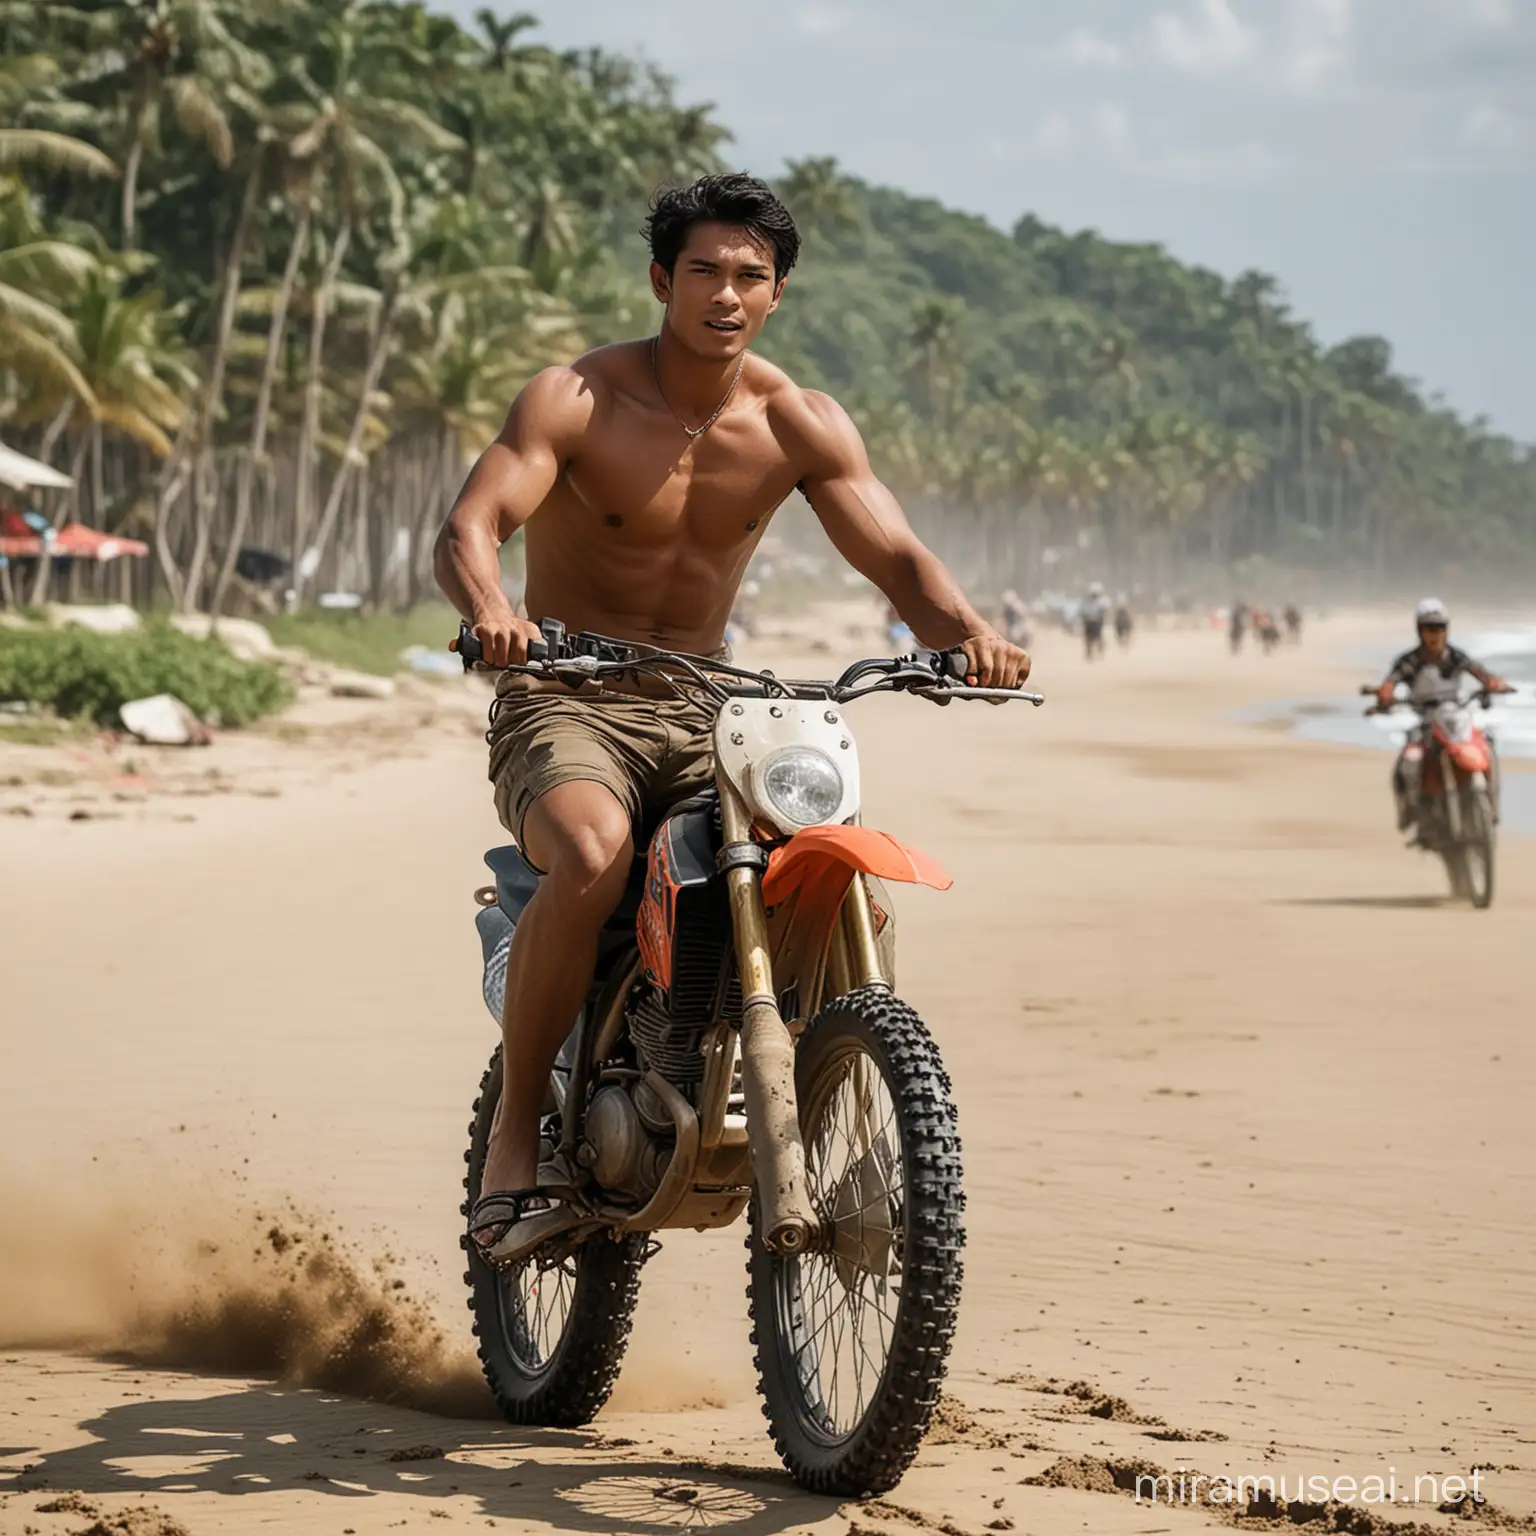 a very beautiful Indonesian man is riding a dirt bike, with a busy beach in the background
